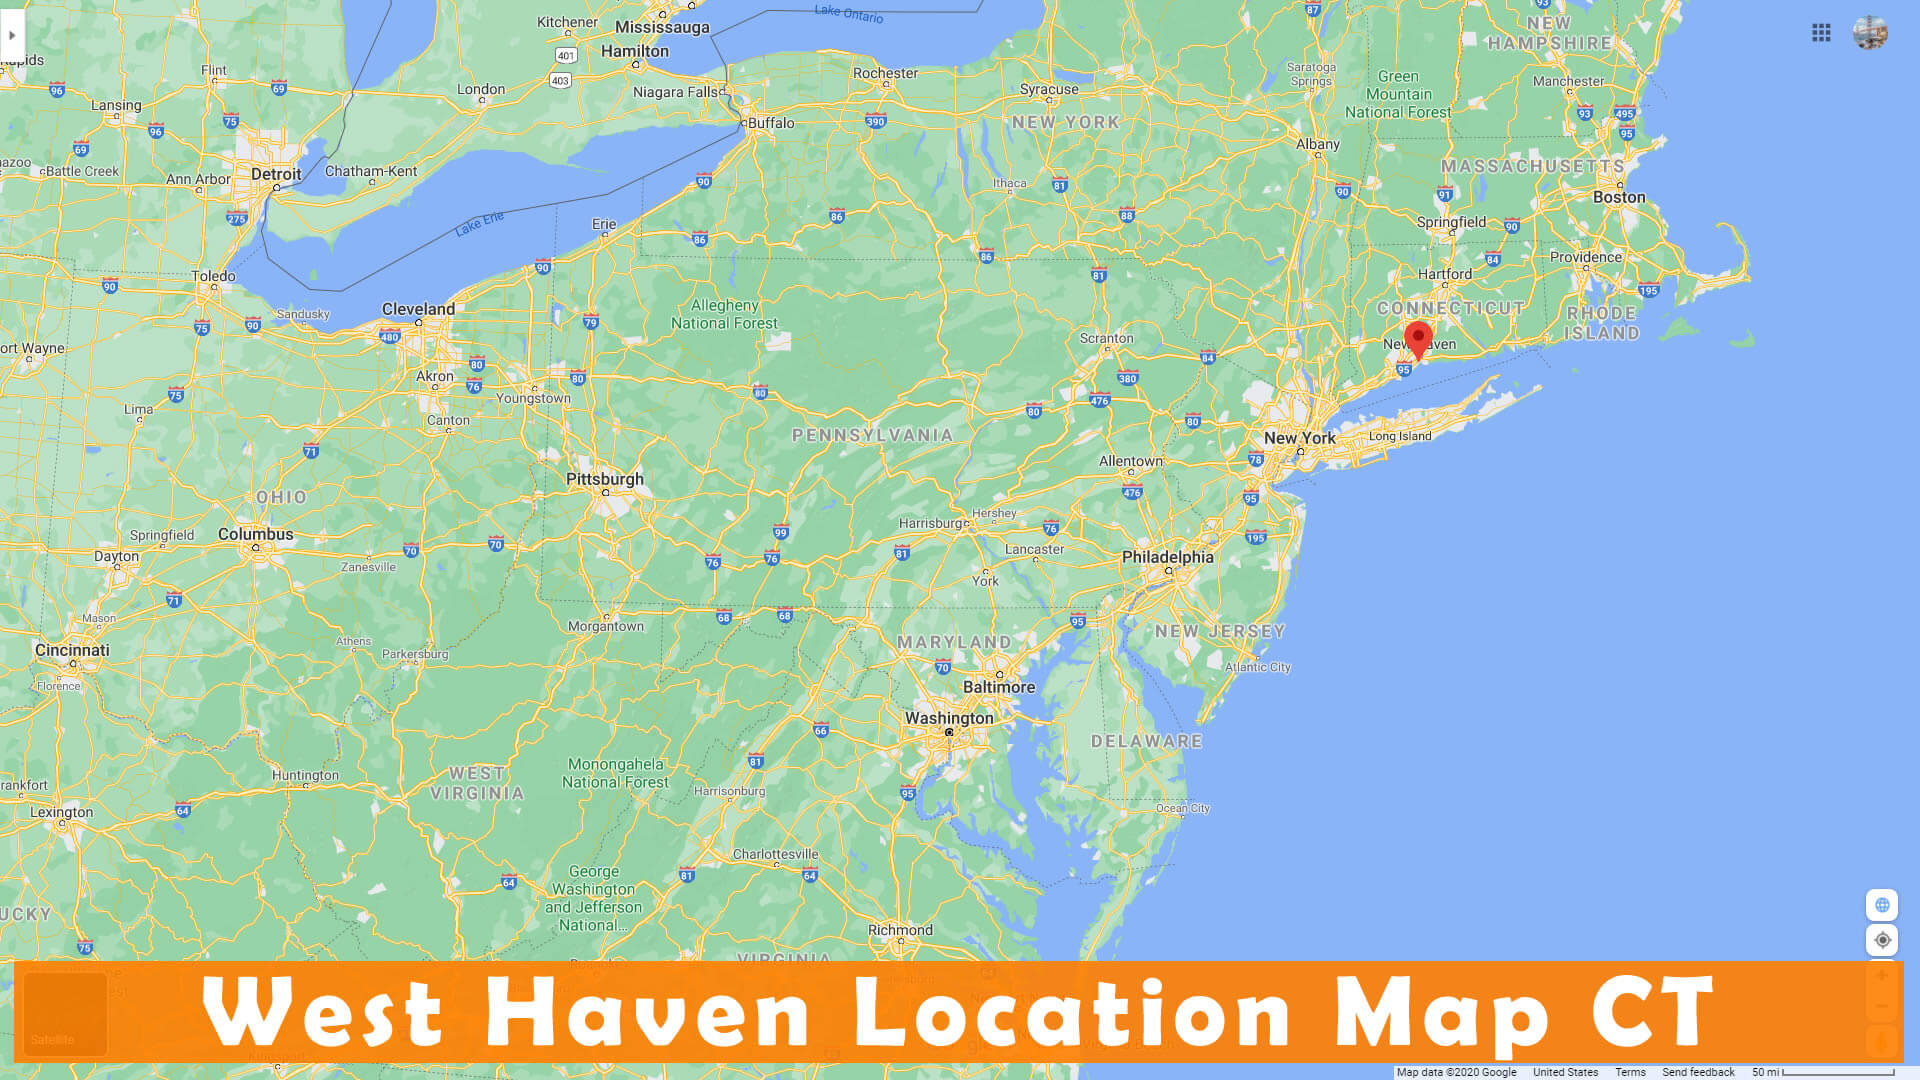 West Haven Emplacement Carte CT